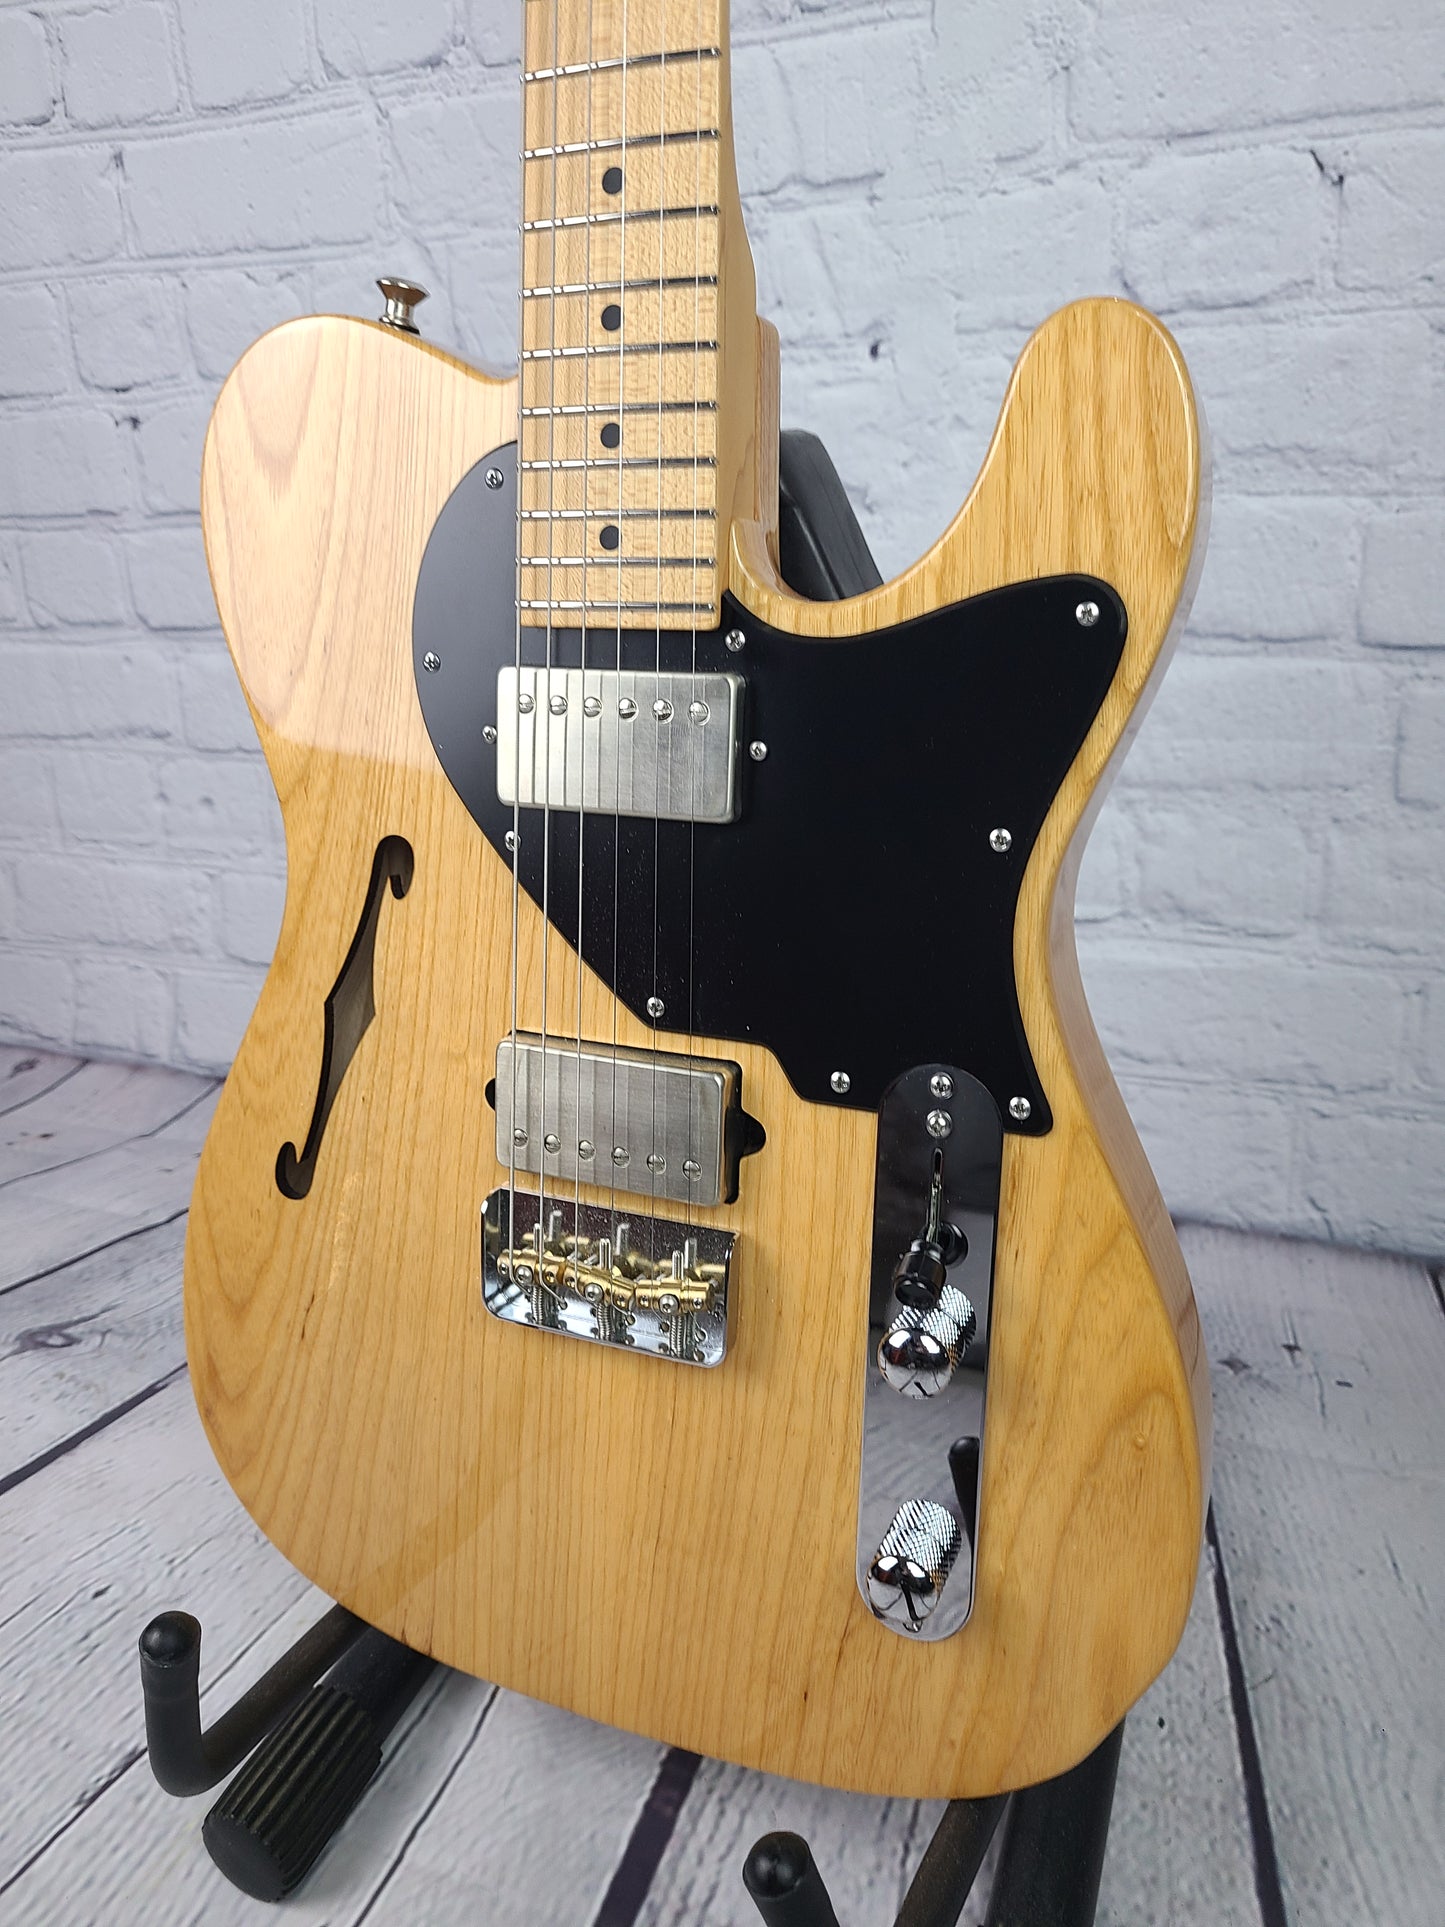 USED Suhr Alt T Pro Semi-Hollow Telecaster Style Electric Guitar 2019